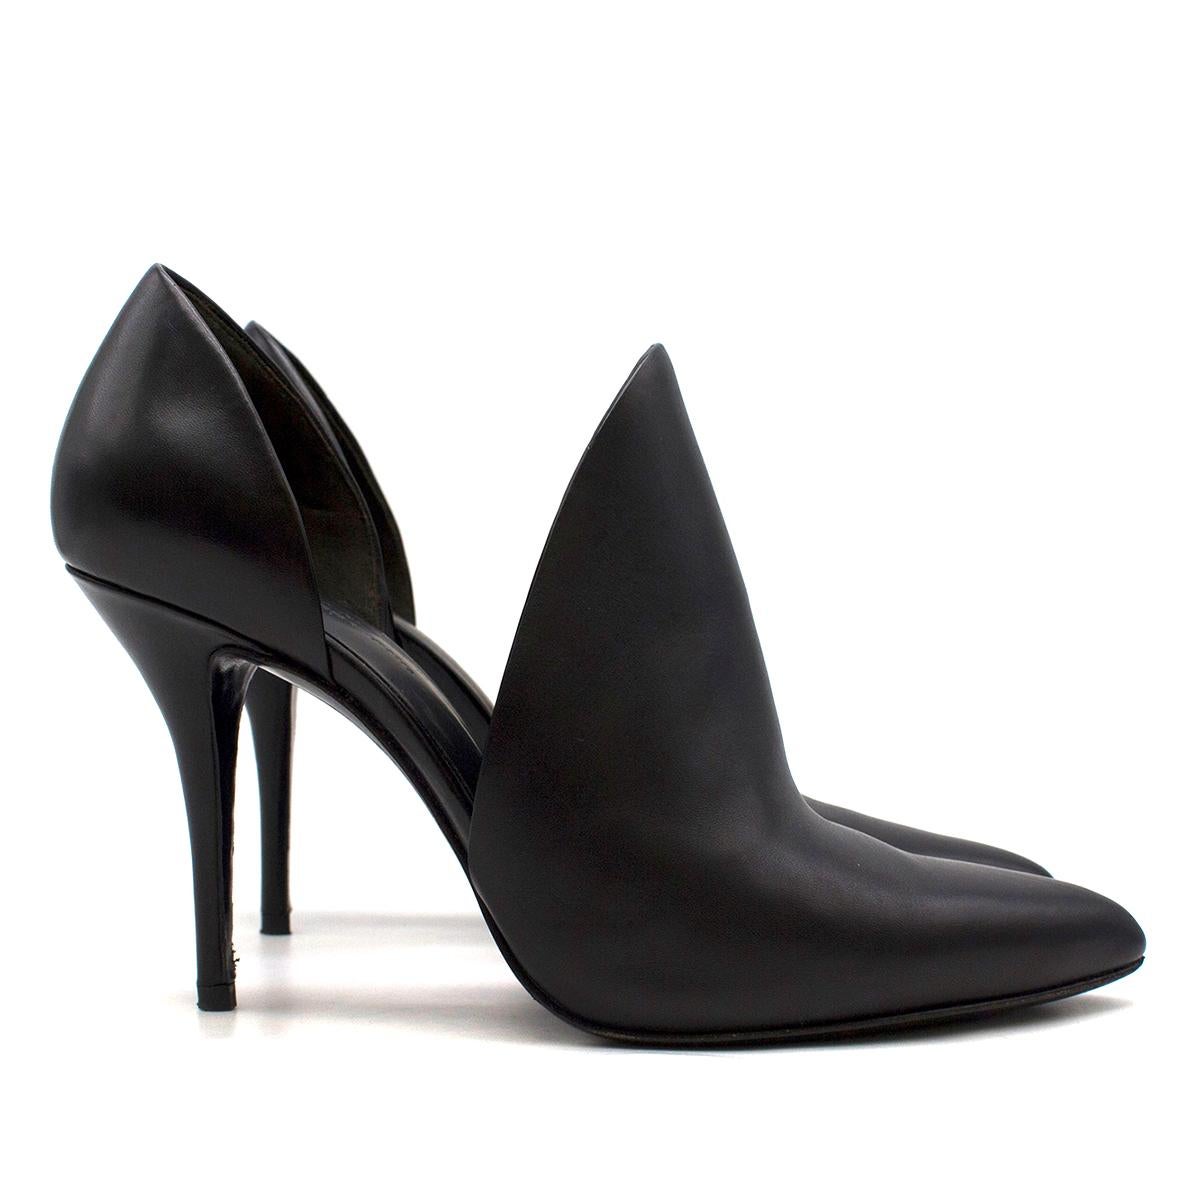 Alexander Wang Leva D'Orsay Leather Pumps in Black

- Black leather pump
- Slip on style
- Pointed toe
- 90mm stiletto heel
- Black leather lining with logo embroidered
- Black leather sole

Please note, these items are pre-owned and may show some